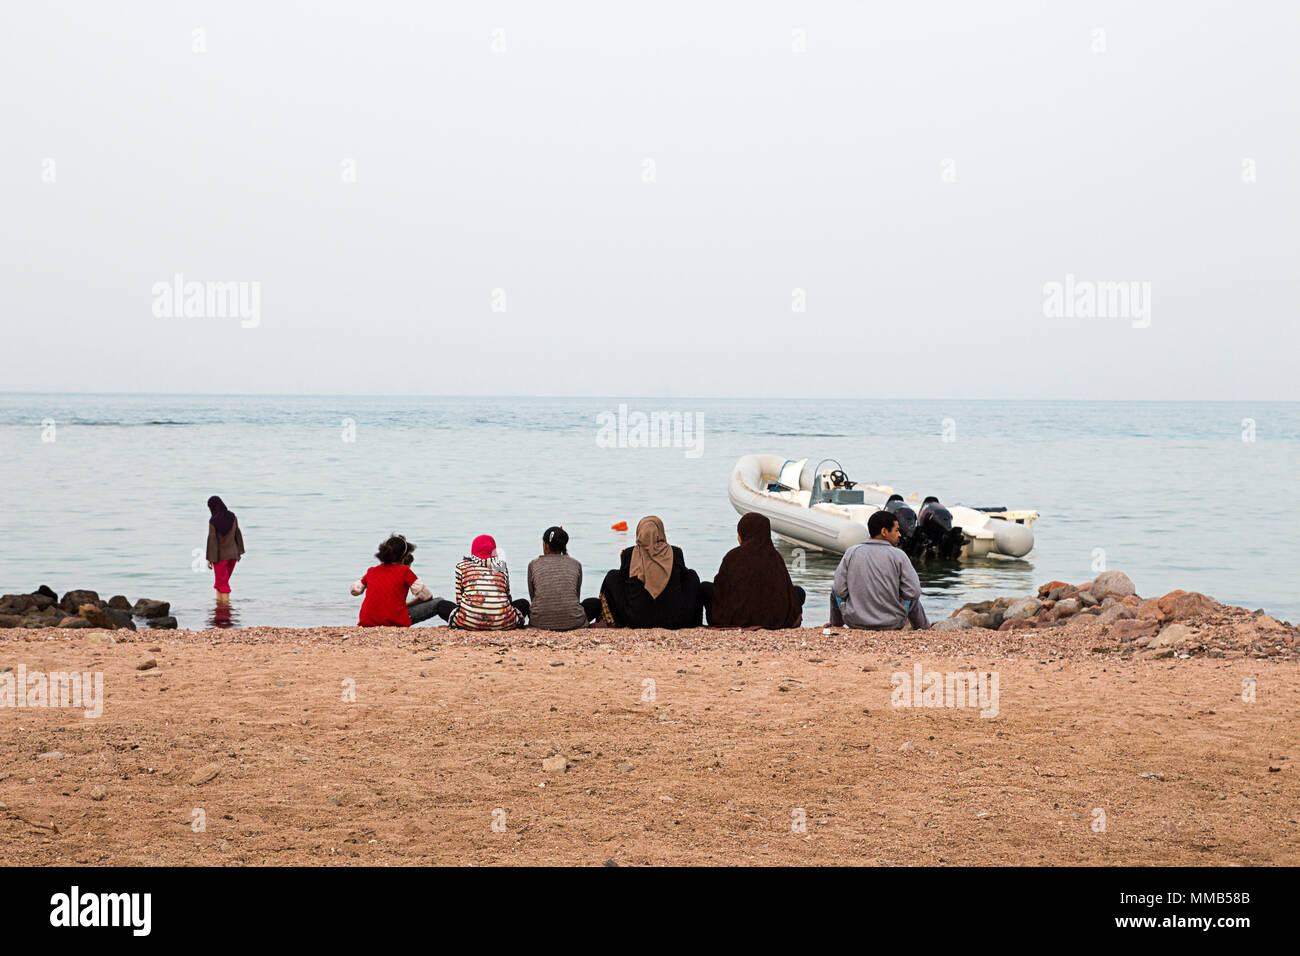 Bedouin familiy on beach Dahab, Sinai, Egypt. Traditional bedouin lifestyle, clothes. Fishing in Red Sea. Stock Photo